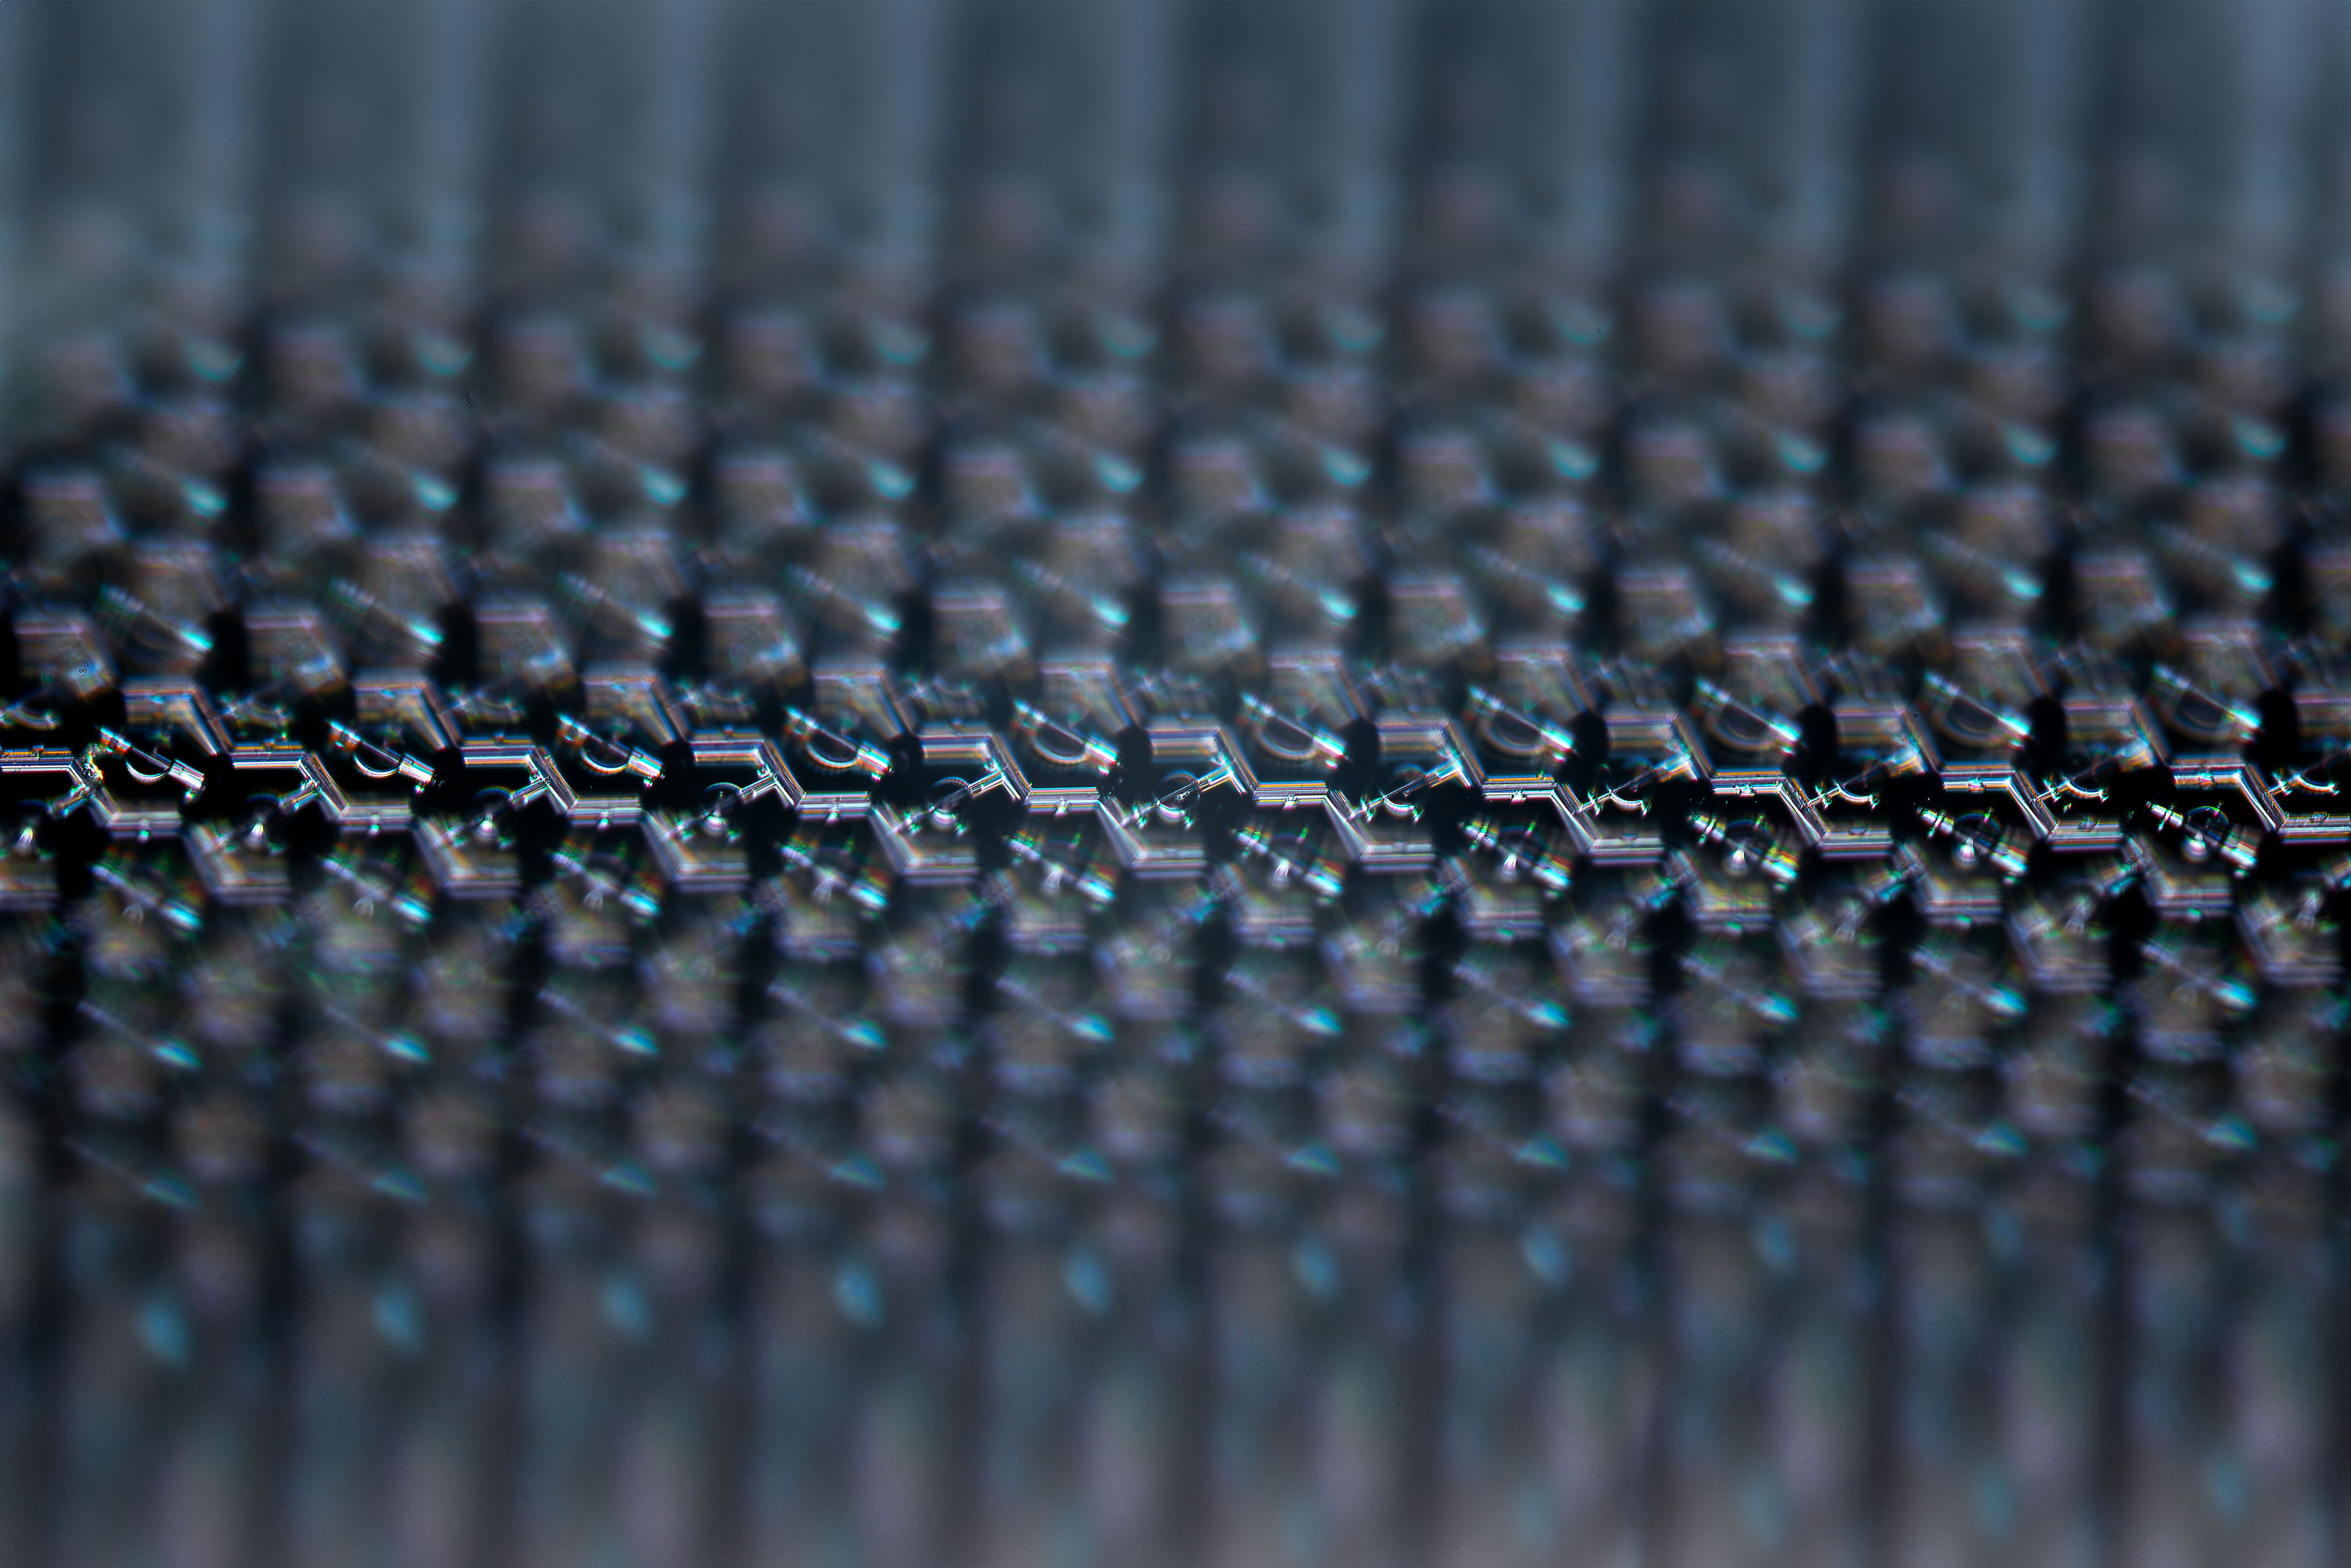 Extreme closeup image of the tiny, repeating hexagonal pattern of a PRIMA implant.